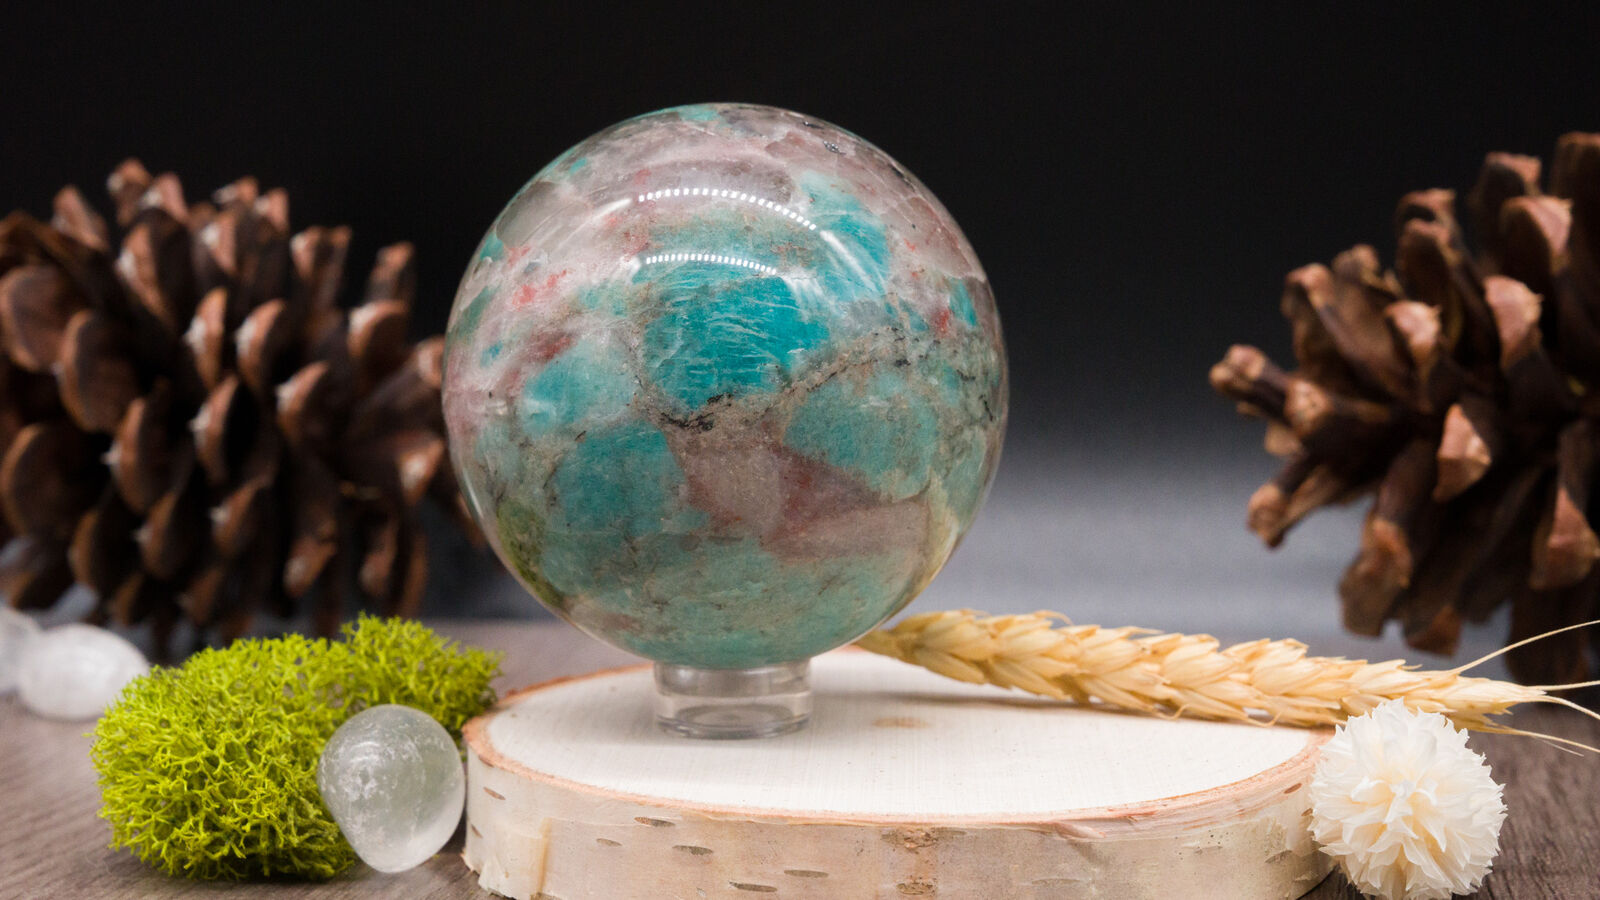 Amazonite Natural Crystal Sphere With Smoky Quartz Inclusions